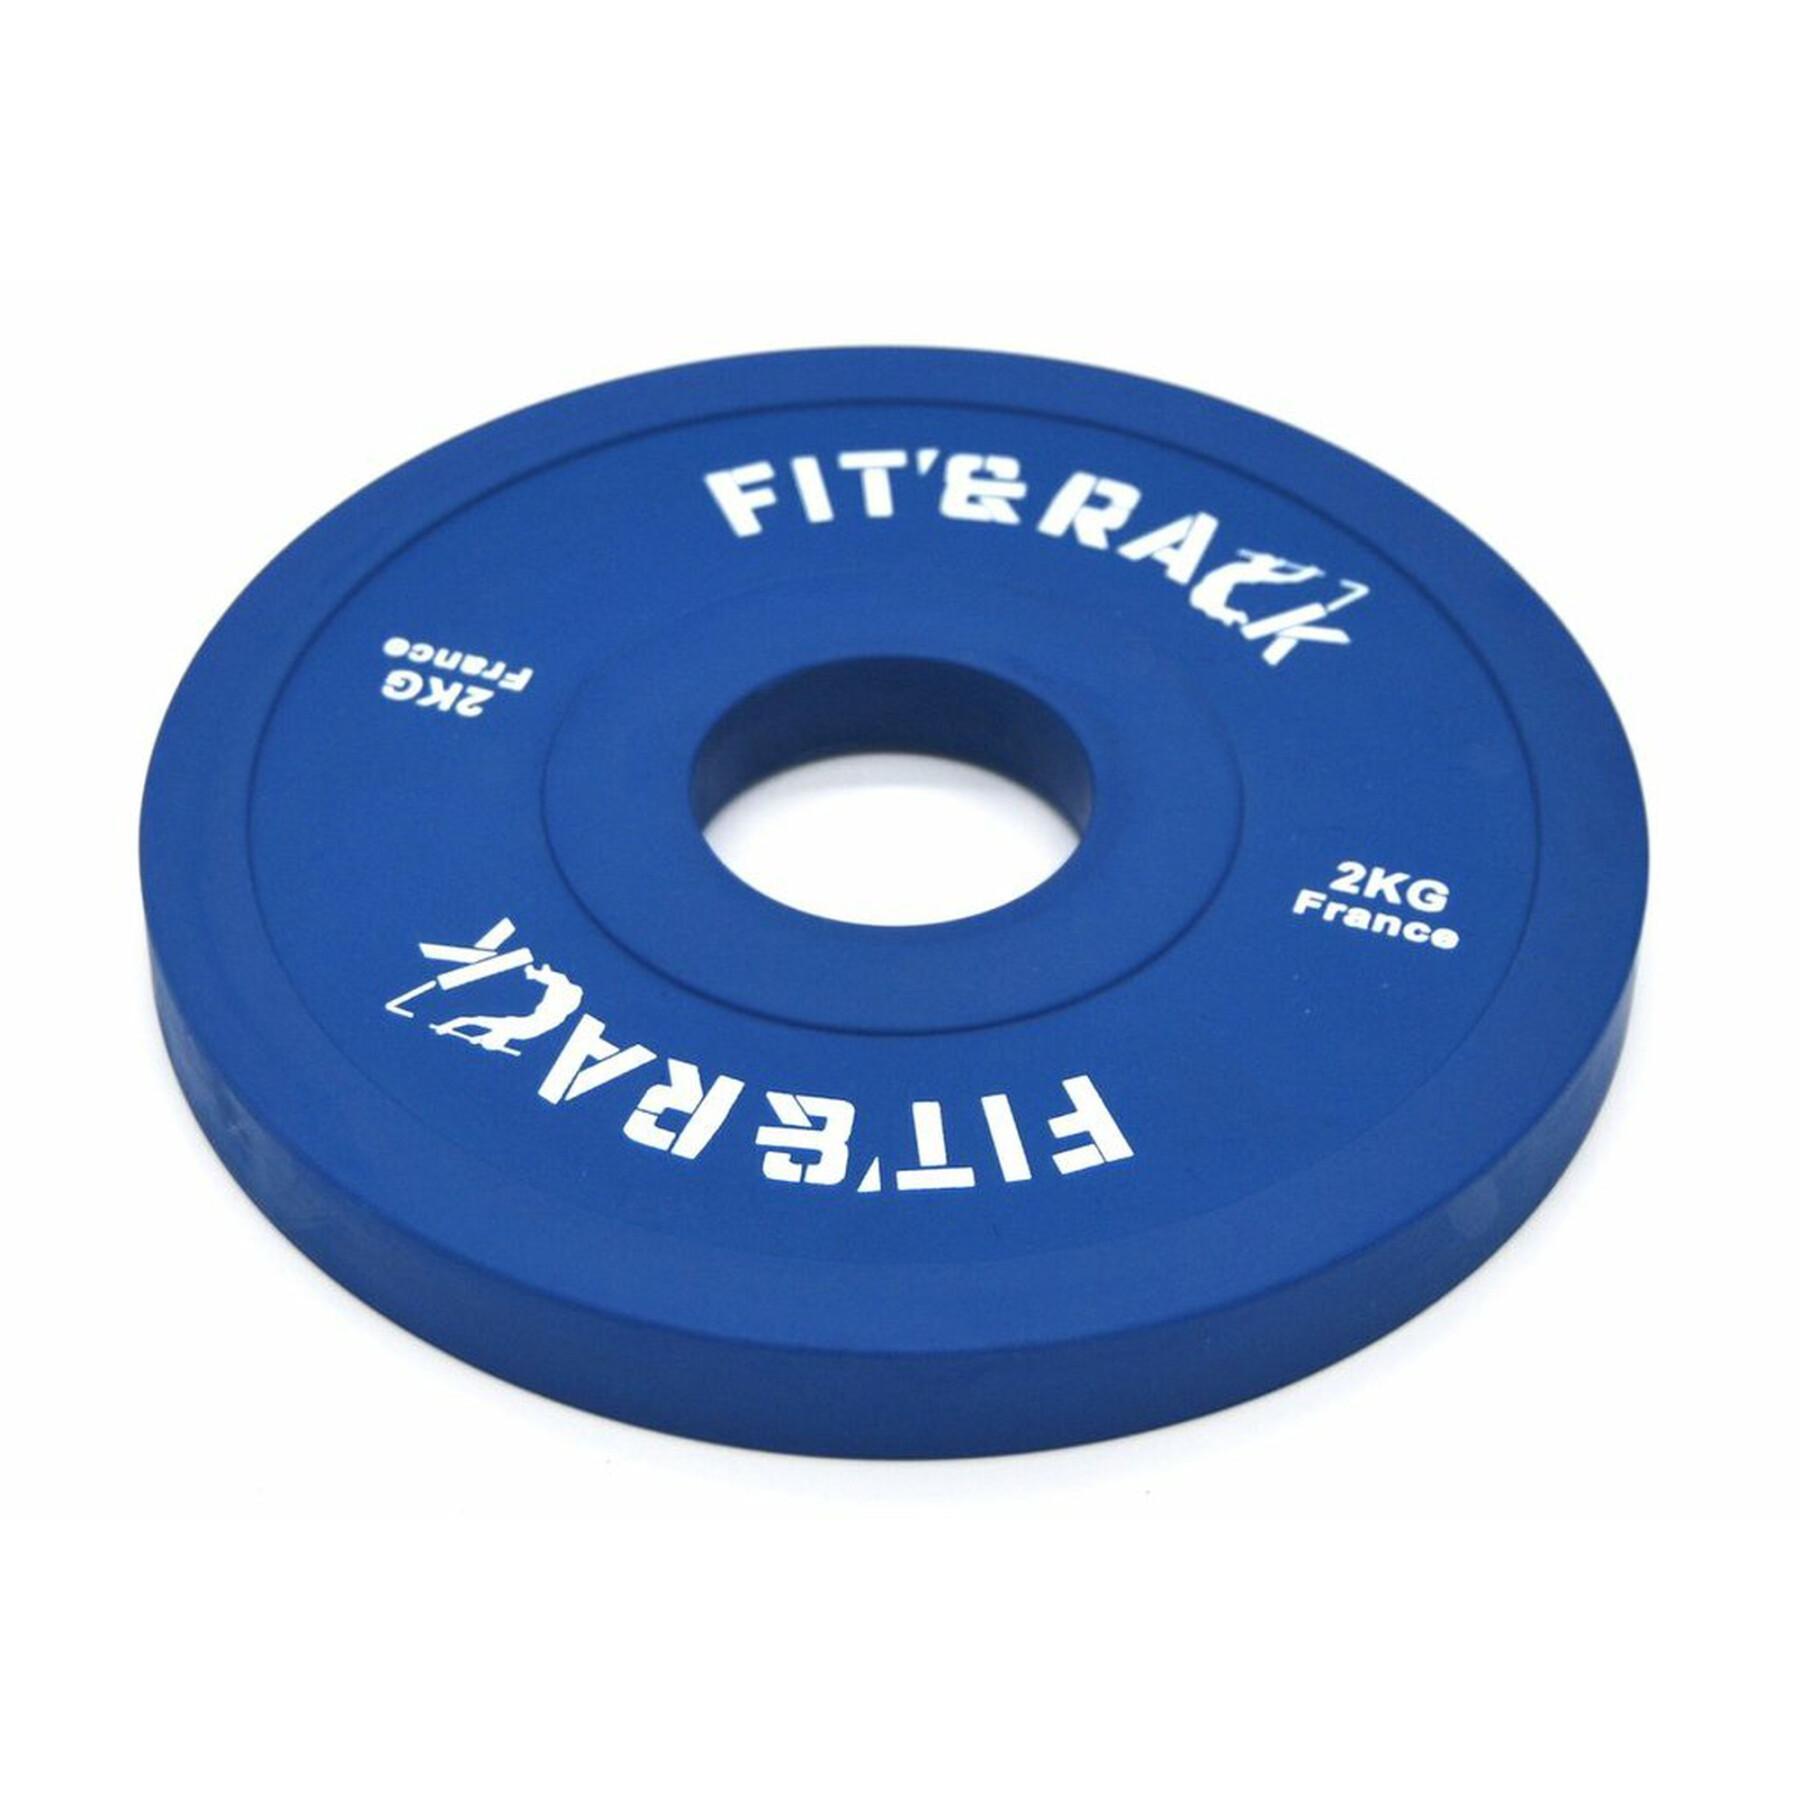 Additional competition weight Fit & Rack 2kg